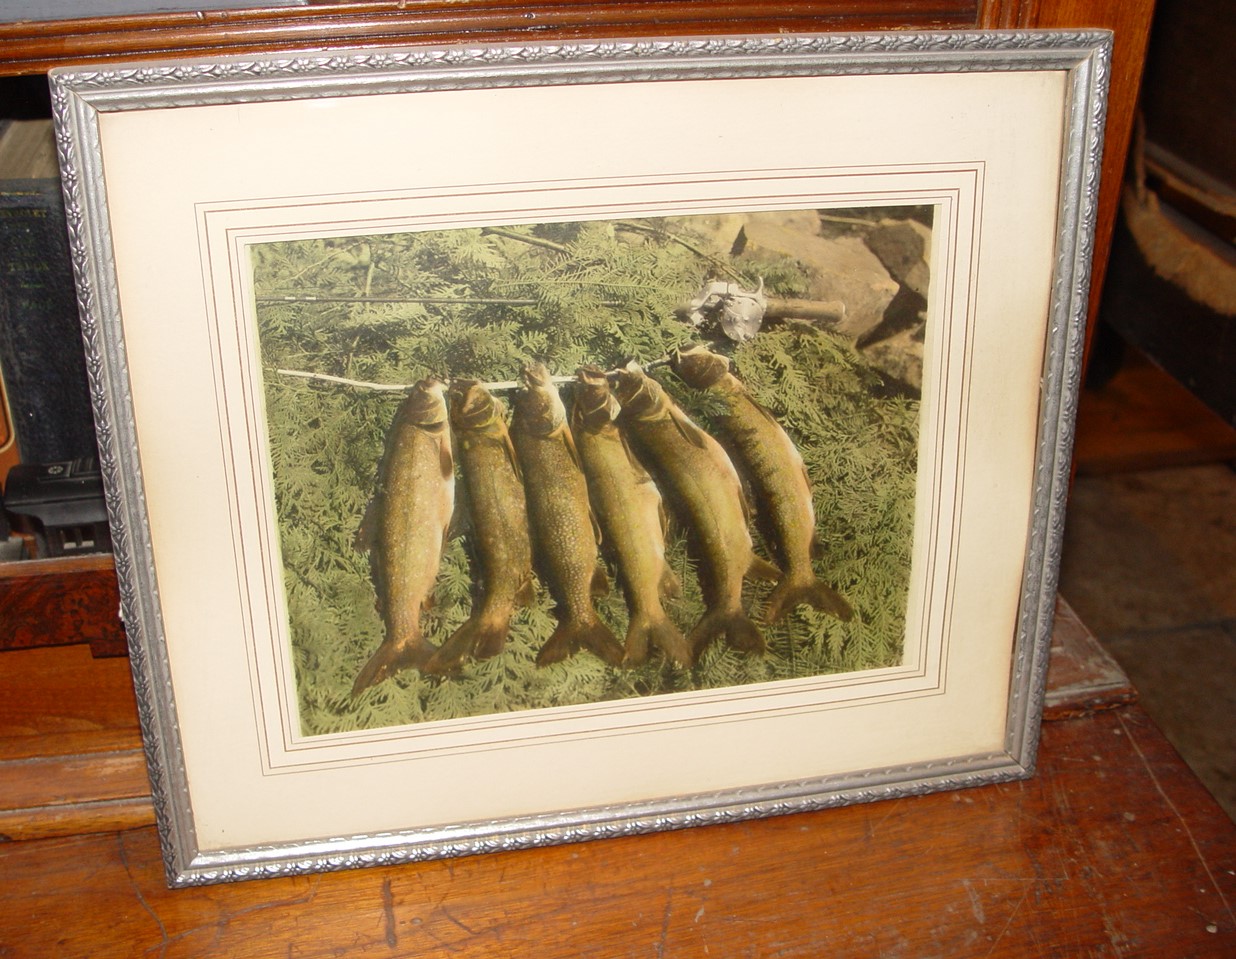 1920s Hand
                        Tinted Photograph, Catch of Trout Fish on Cedar
                        Boughs